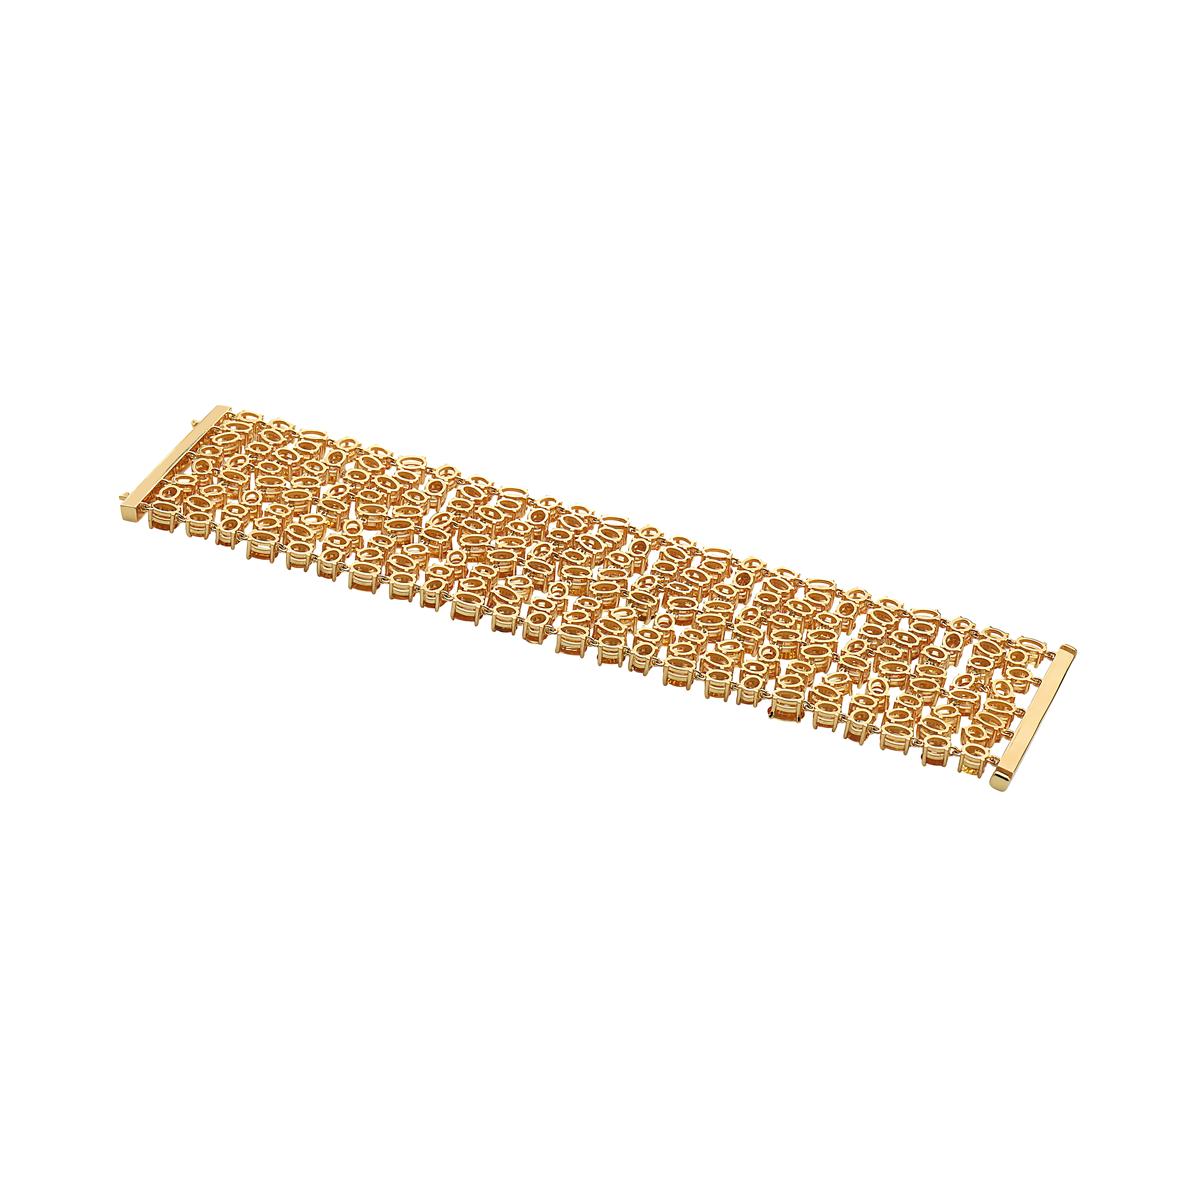 This statement bracelet features 192 yellow sapphires for a total of 101.60 carats set in 14k yellow gold and dipped in 24k yellow gold for a richer look with 14 diamonds weighing 0.68 carats. Snap closure. 84 grams total weight. 6 5/8 inches long